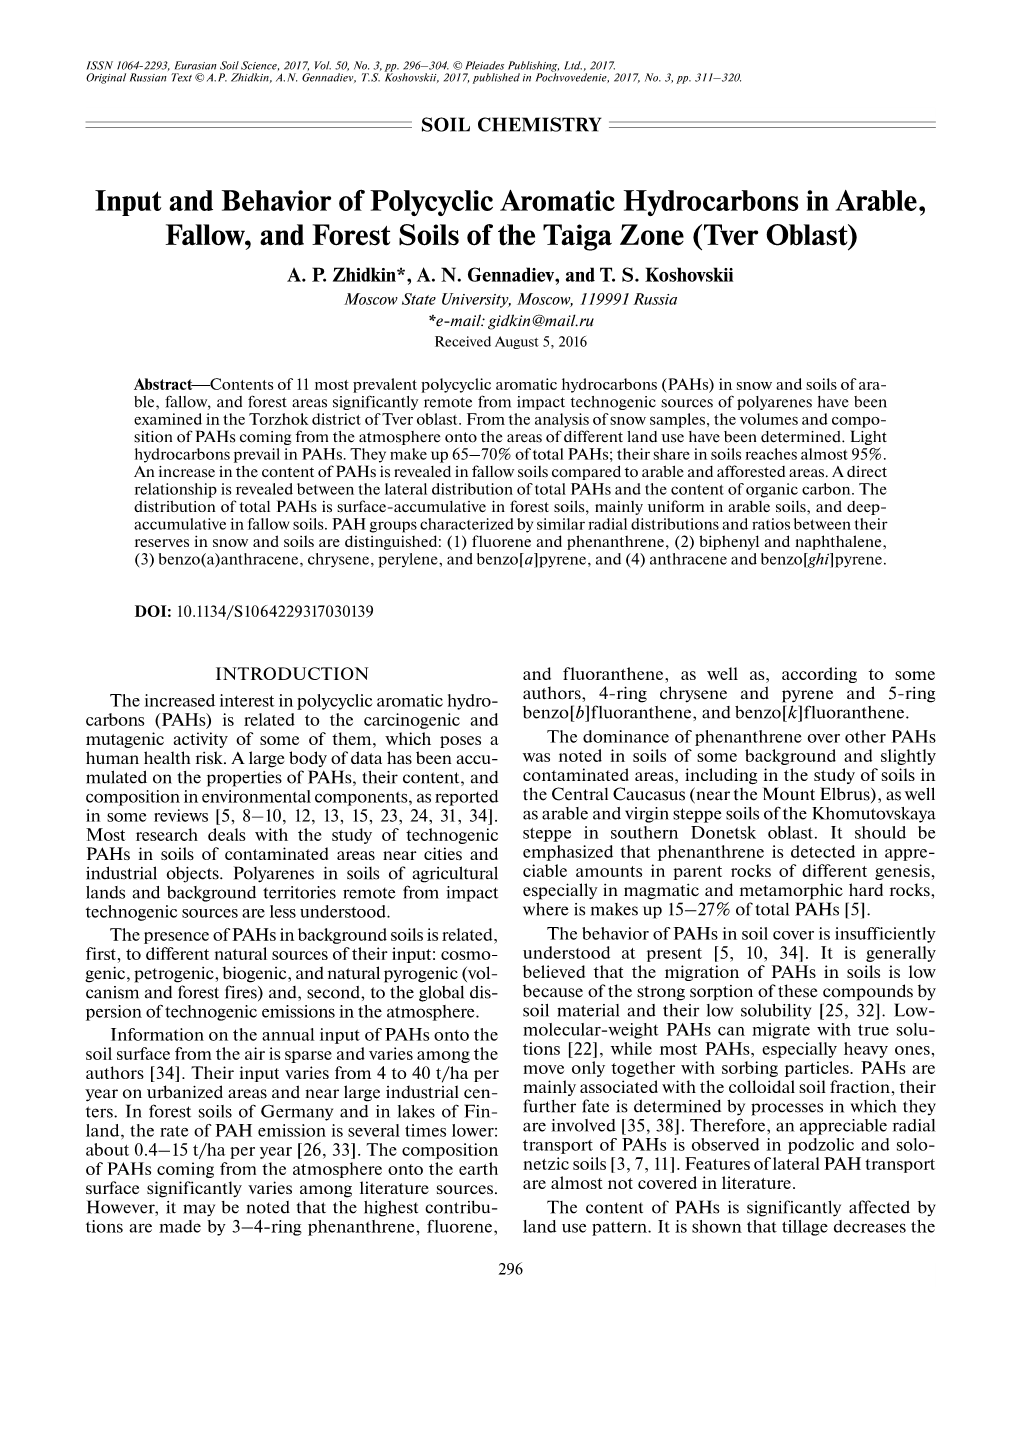 Input and Behavior of Polycyclic Aromatic Hydrocarbons in Arable, Fallow, and Forest Soils of the Taiga Zone (Tver Oblast) A